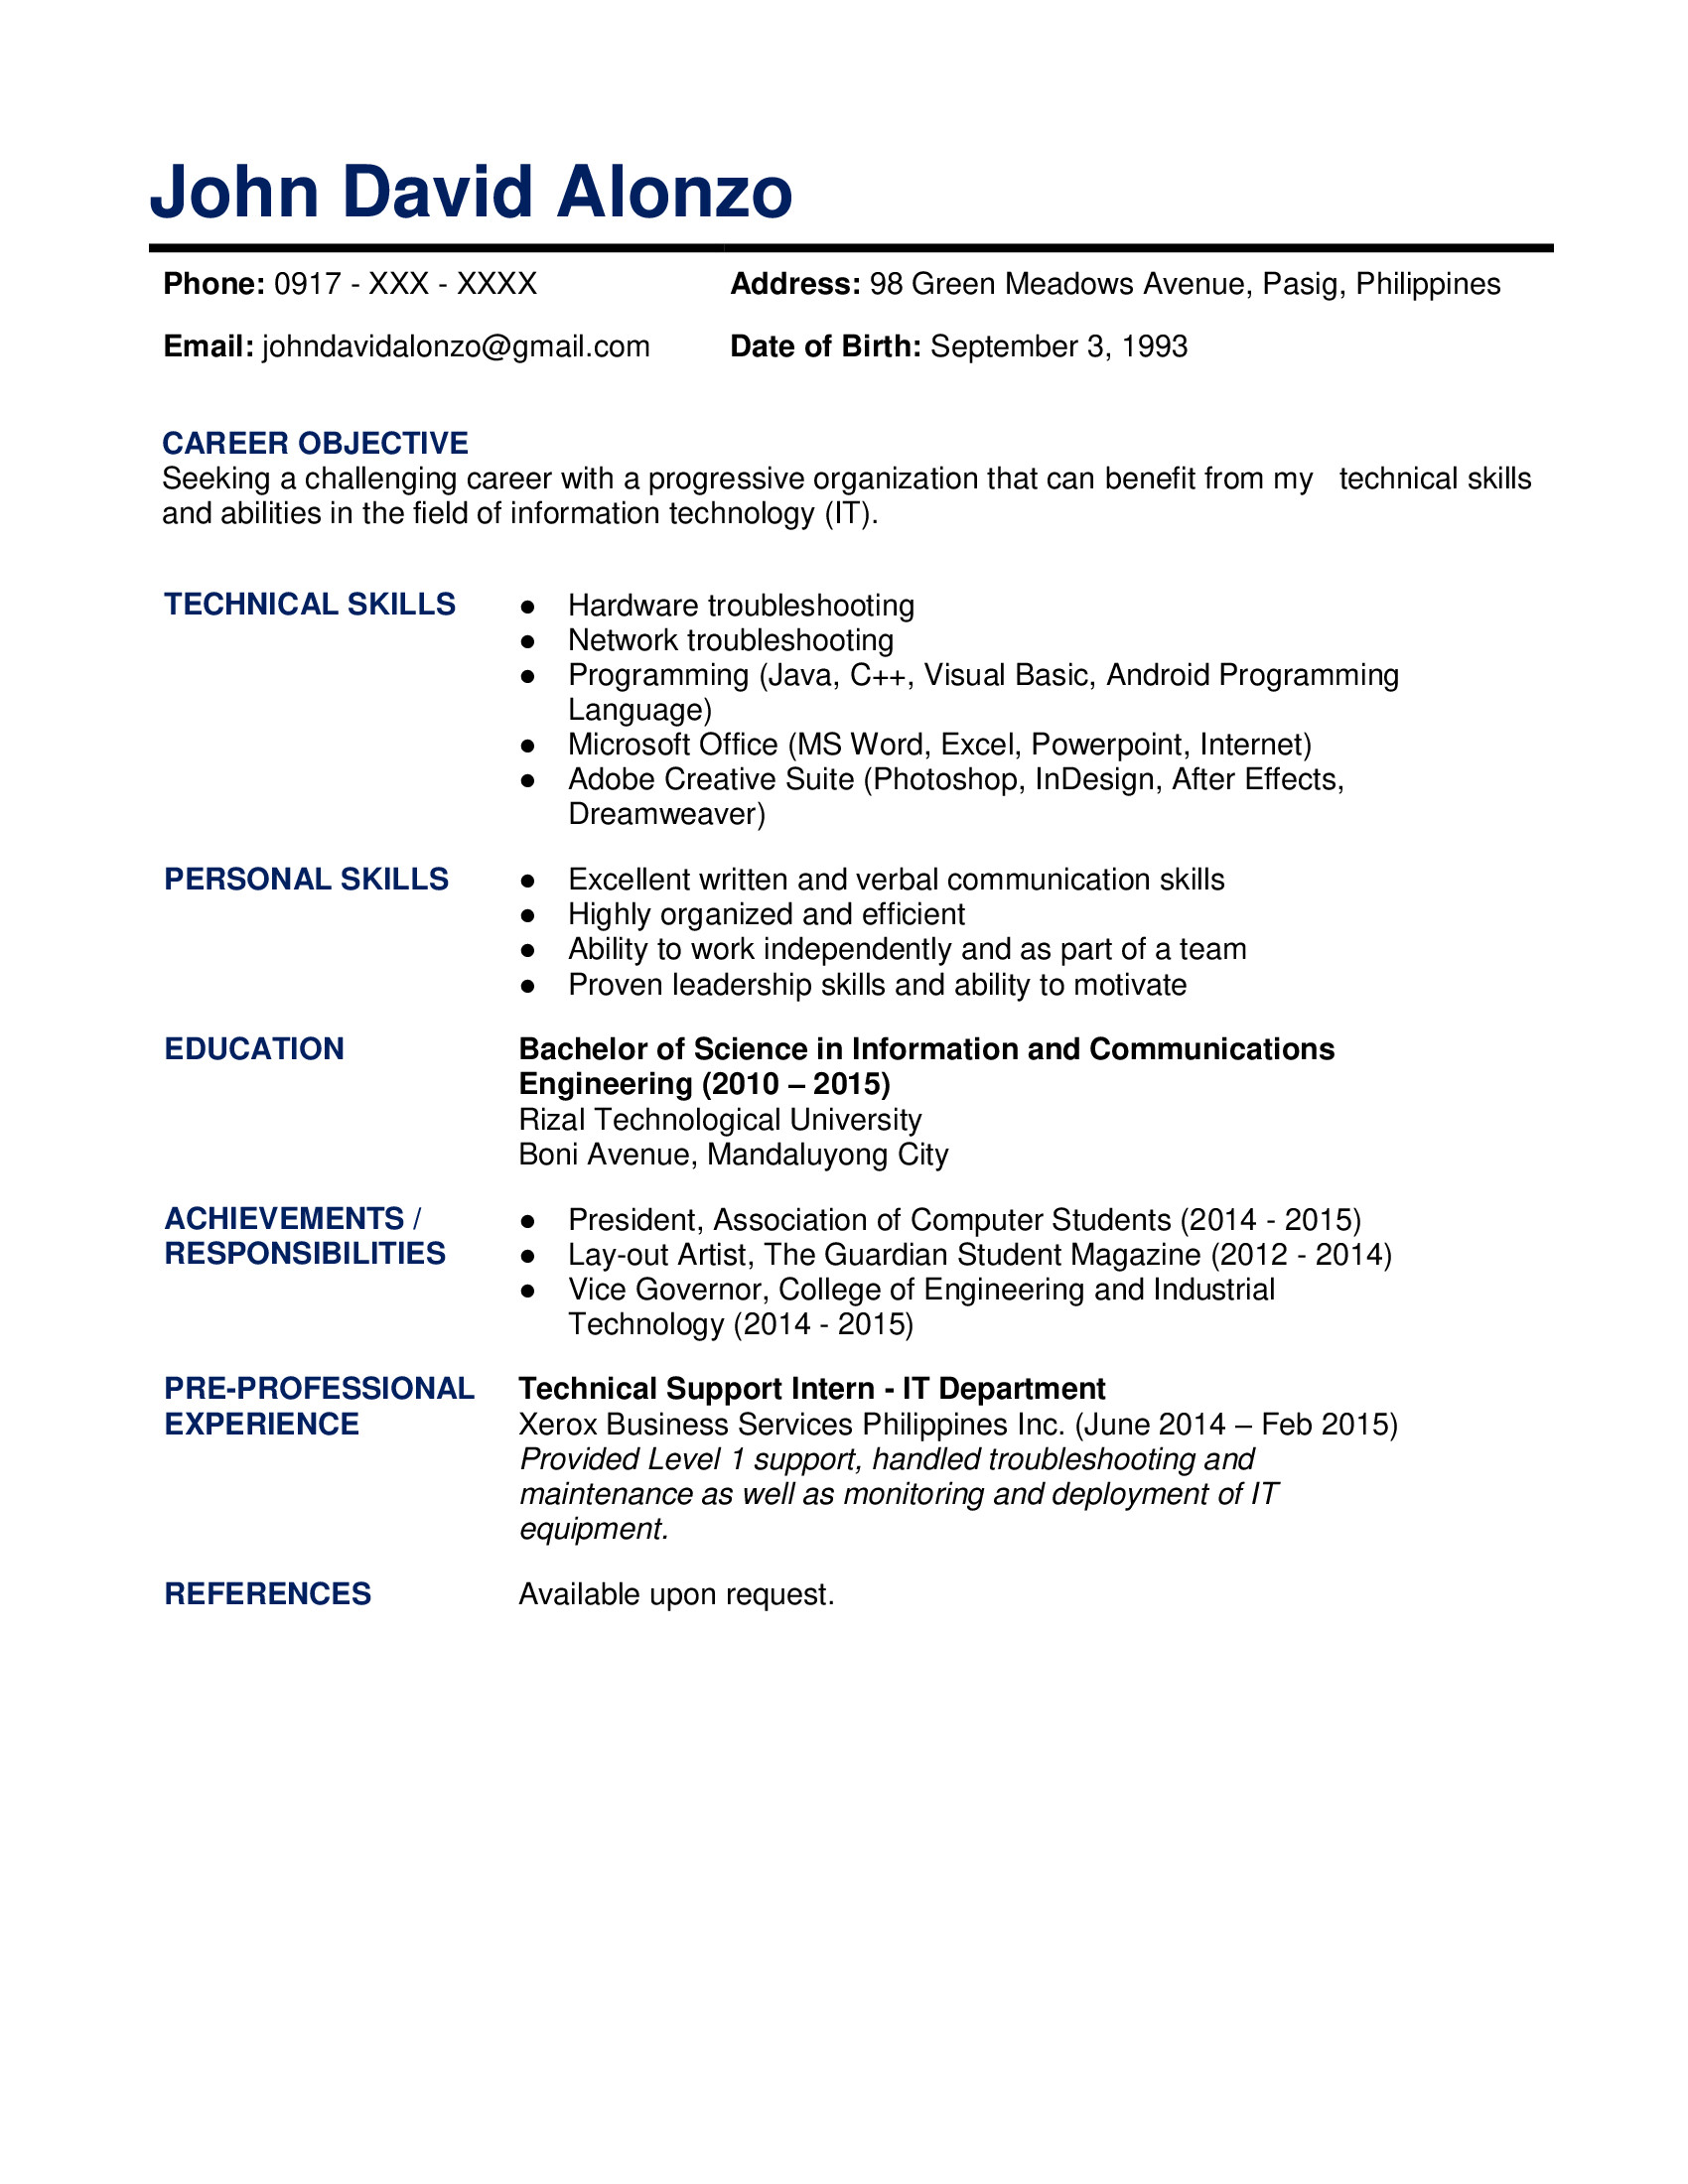 Sample Resume for Ms In Us with Work Experience Sample Resume formats for Fresh Graduates